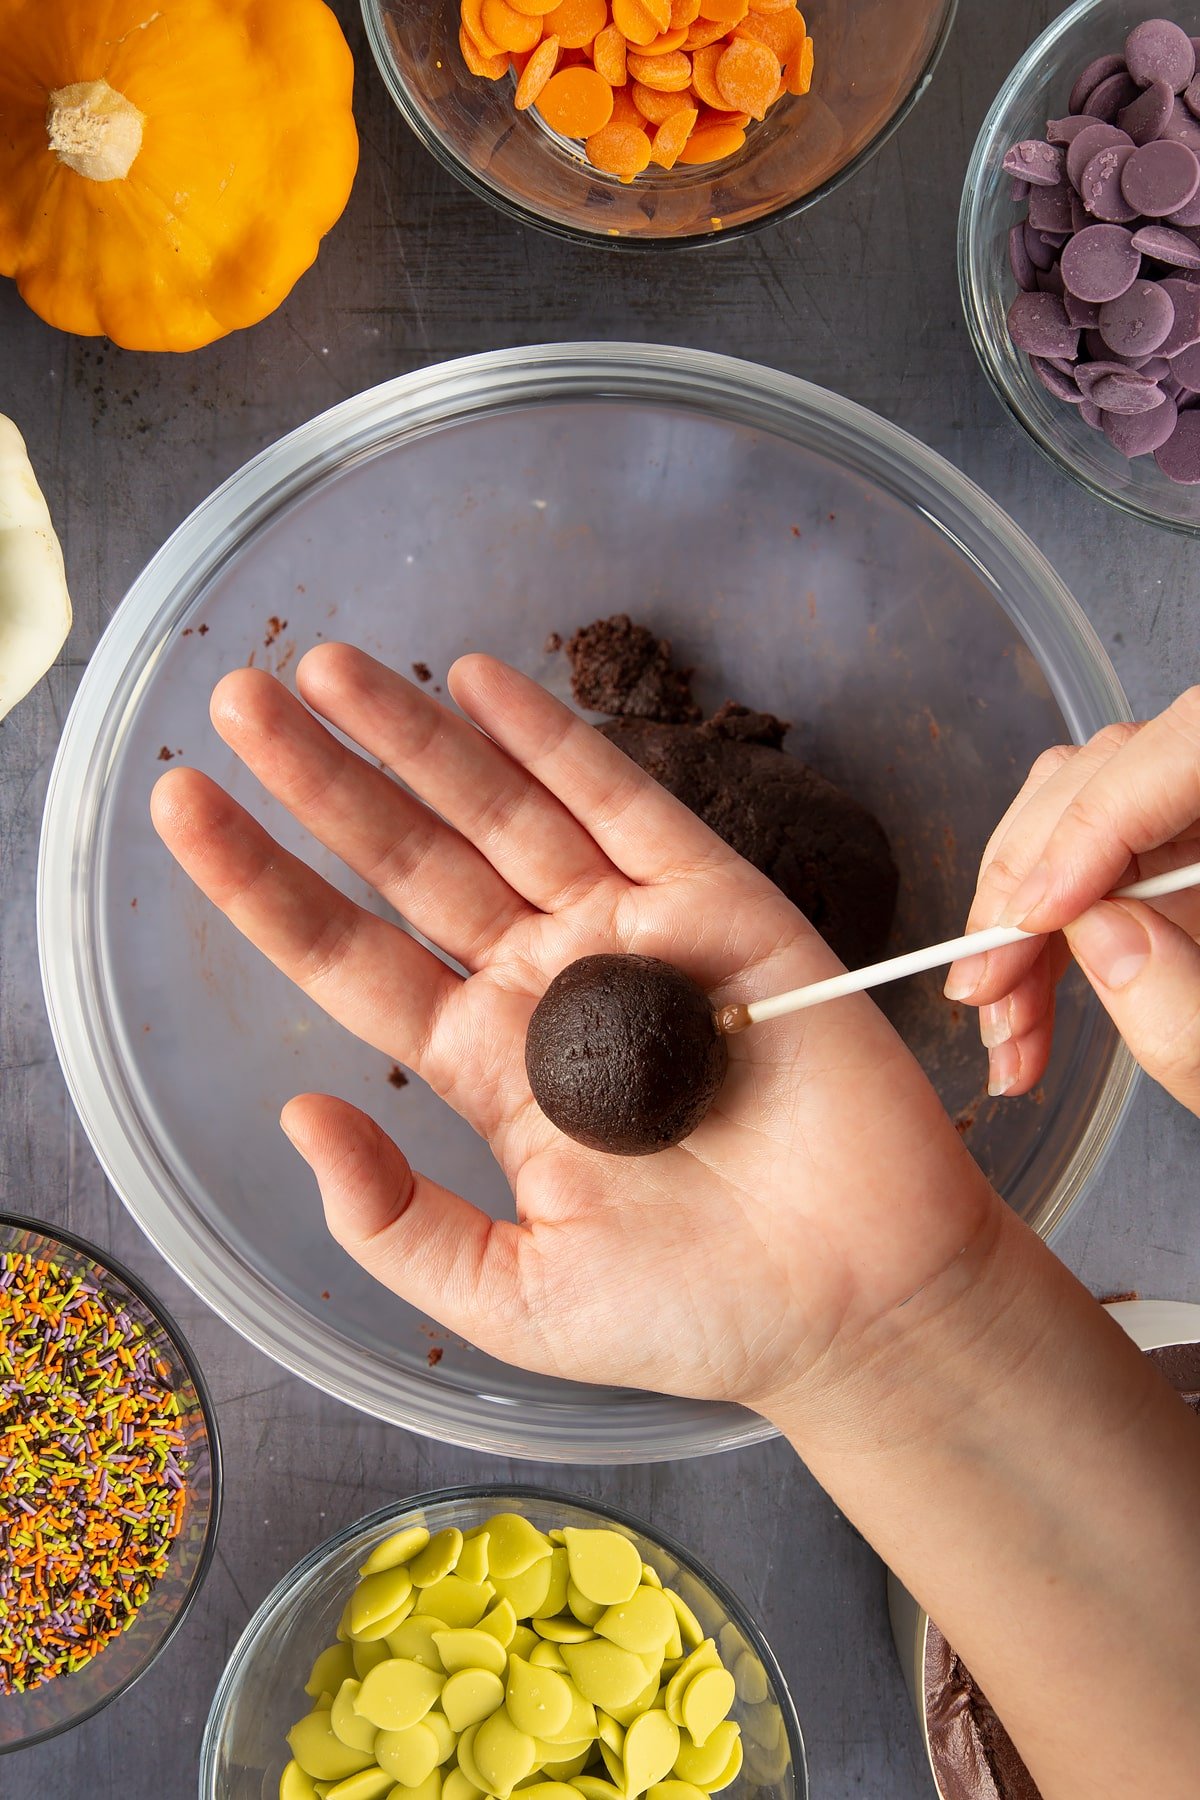 A hand holding a ball of chocolate cake. The other hand holds a stick with melted chocolate on the tip. Ingredients to make Halloween cake pops surround the bowl beneath.